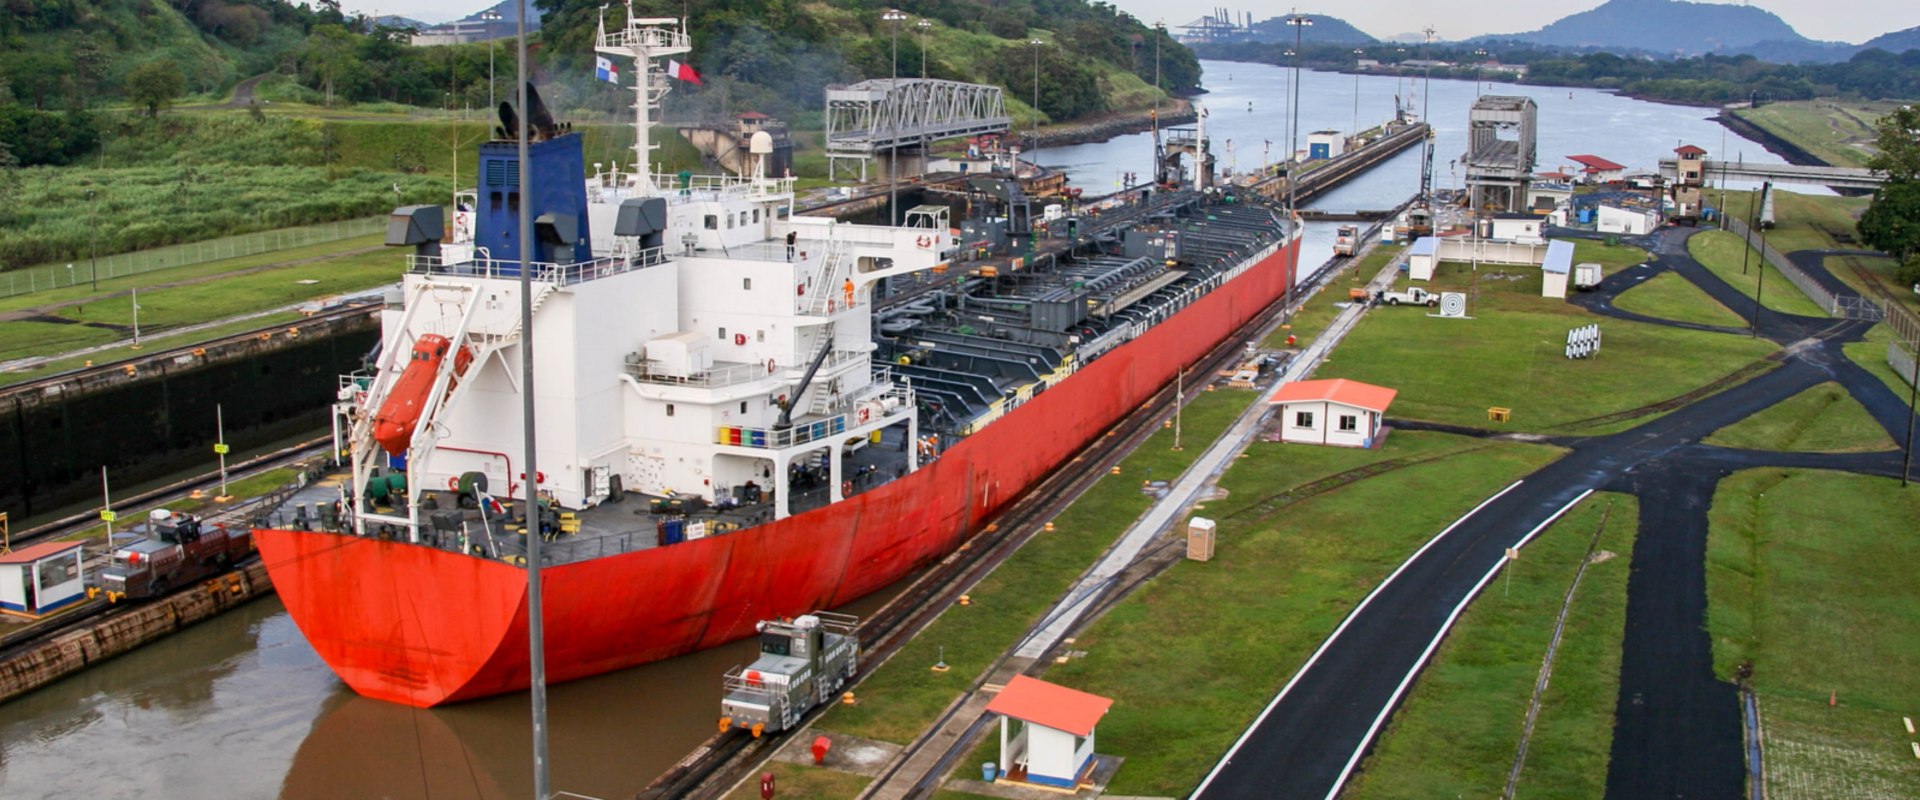 panama canal safe to visit